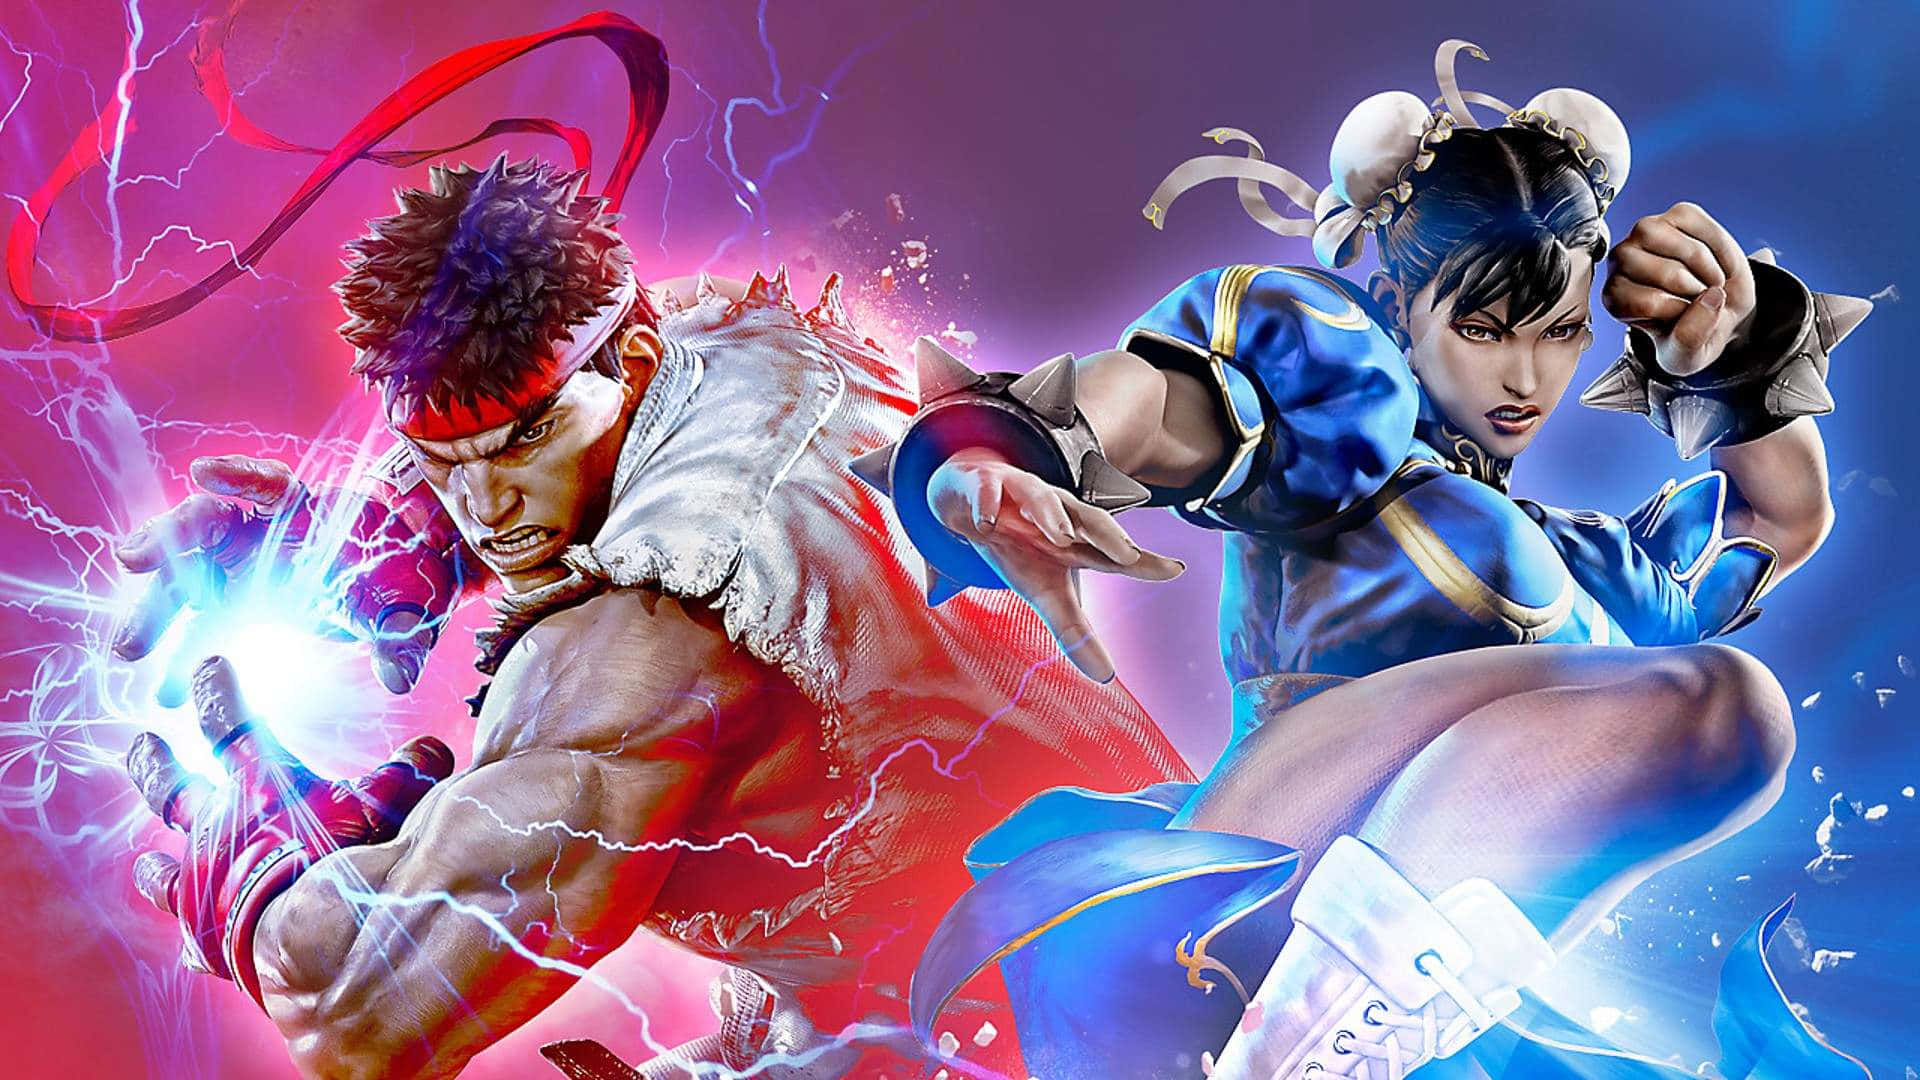 Iconic Street Fighter characters assembled for an epic battle Wallpaper